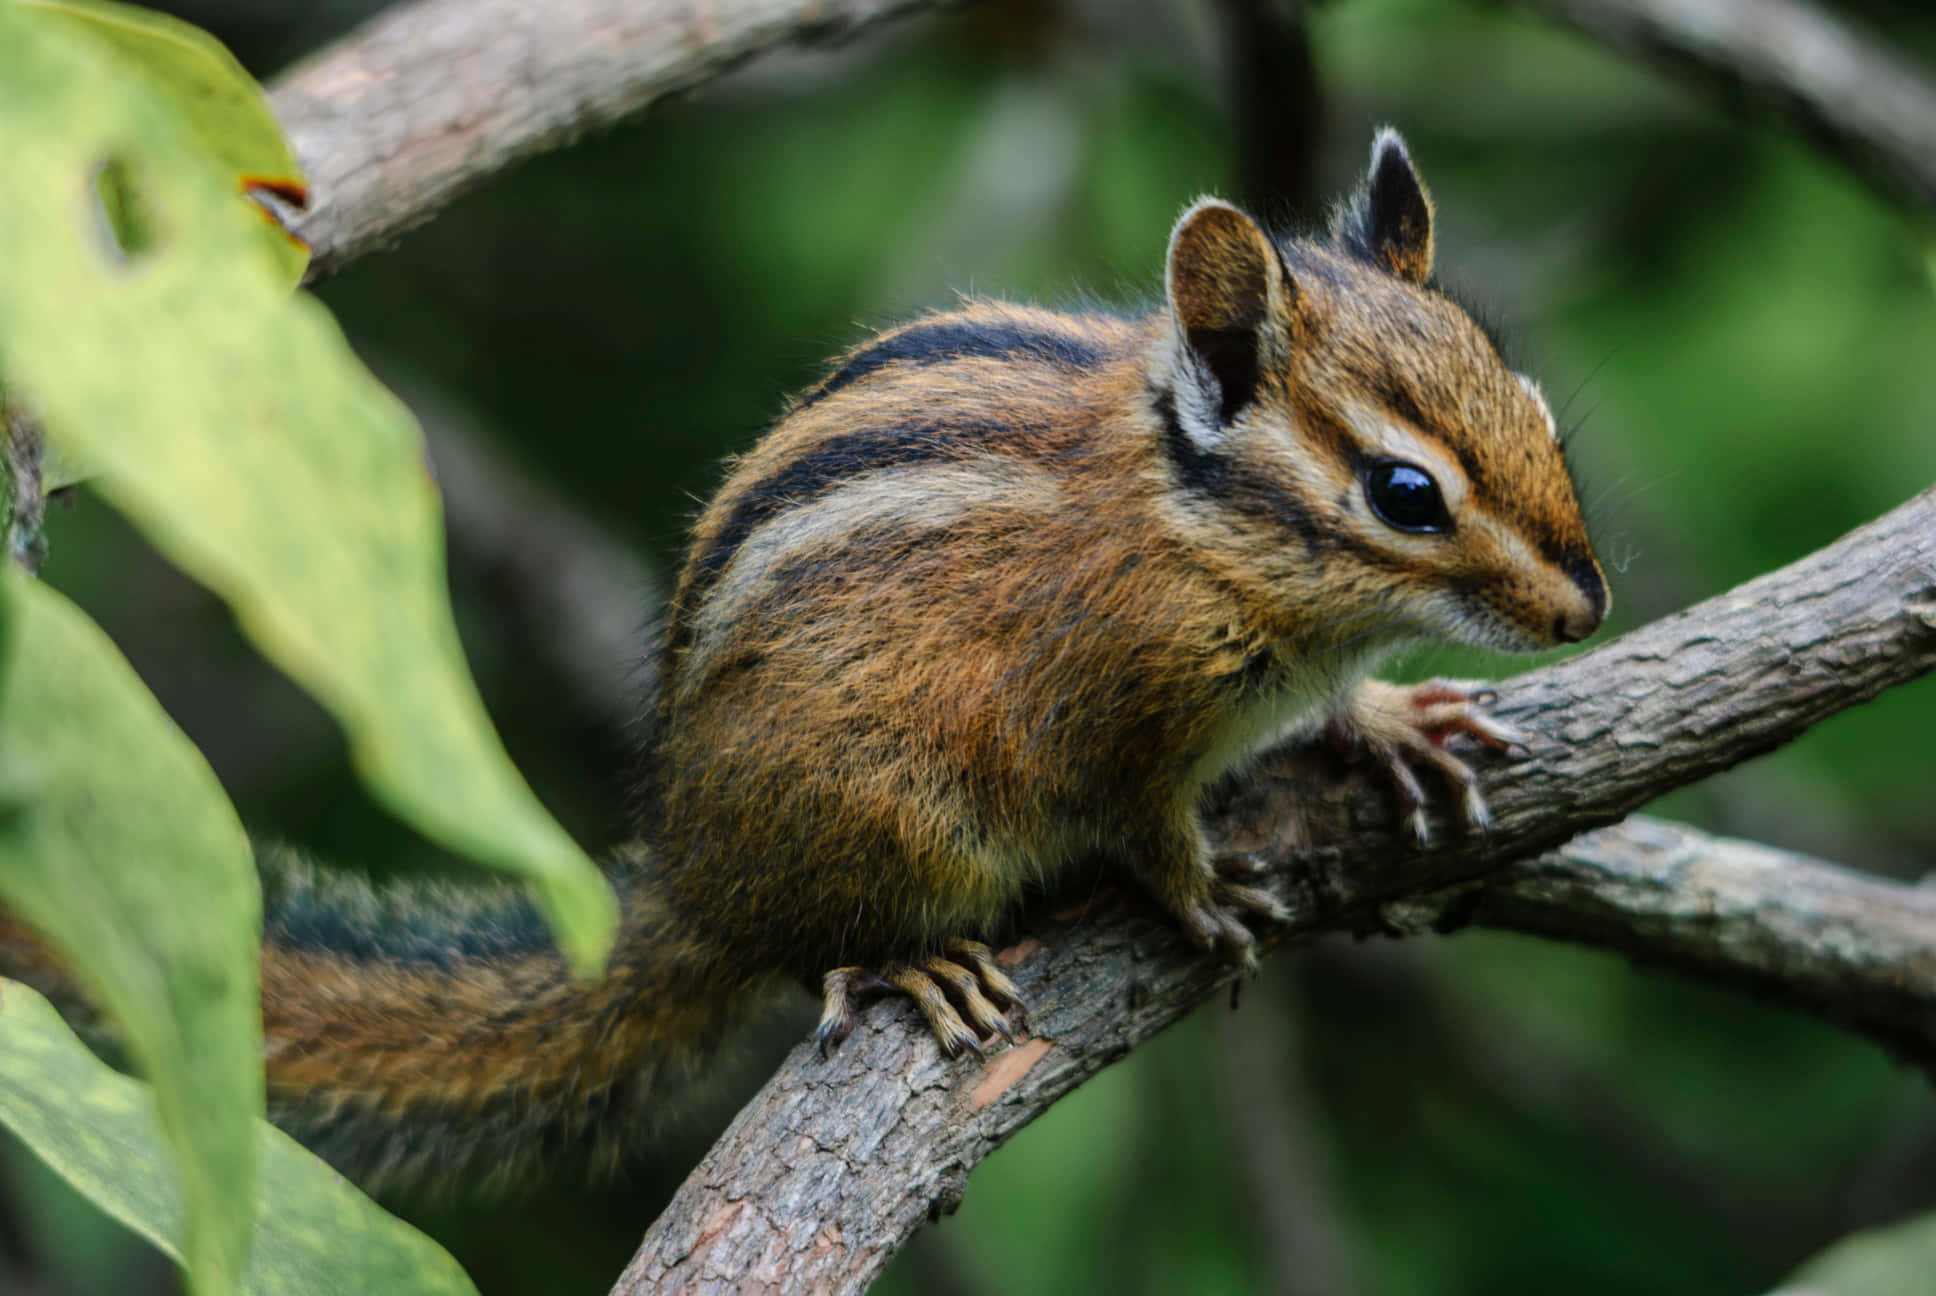 "A cheerful looking chipmunk gathering nuts for the winter ahead"